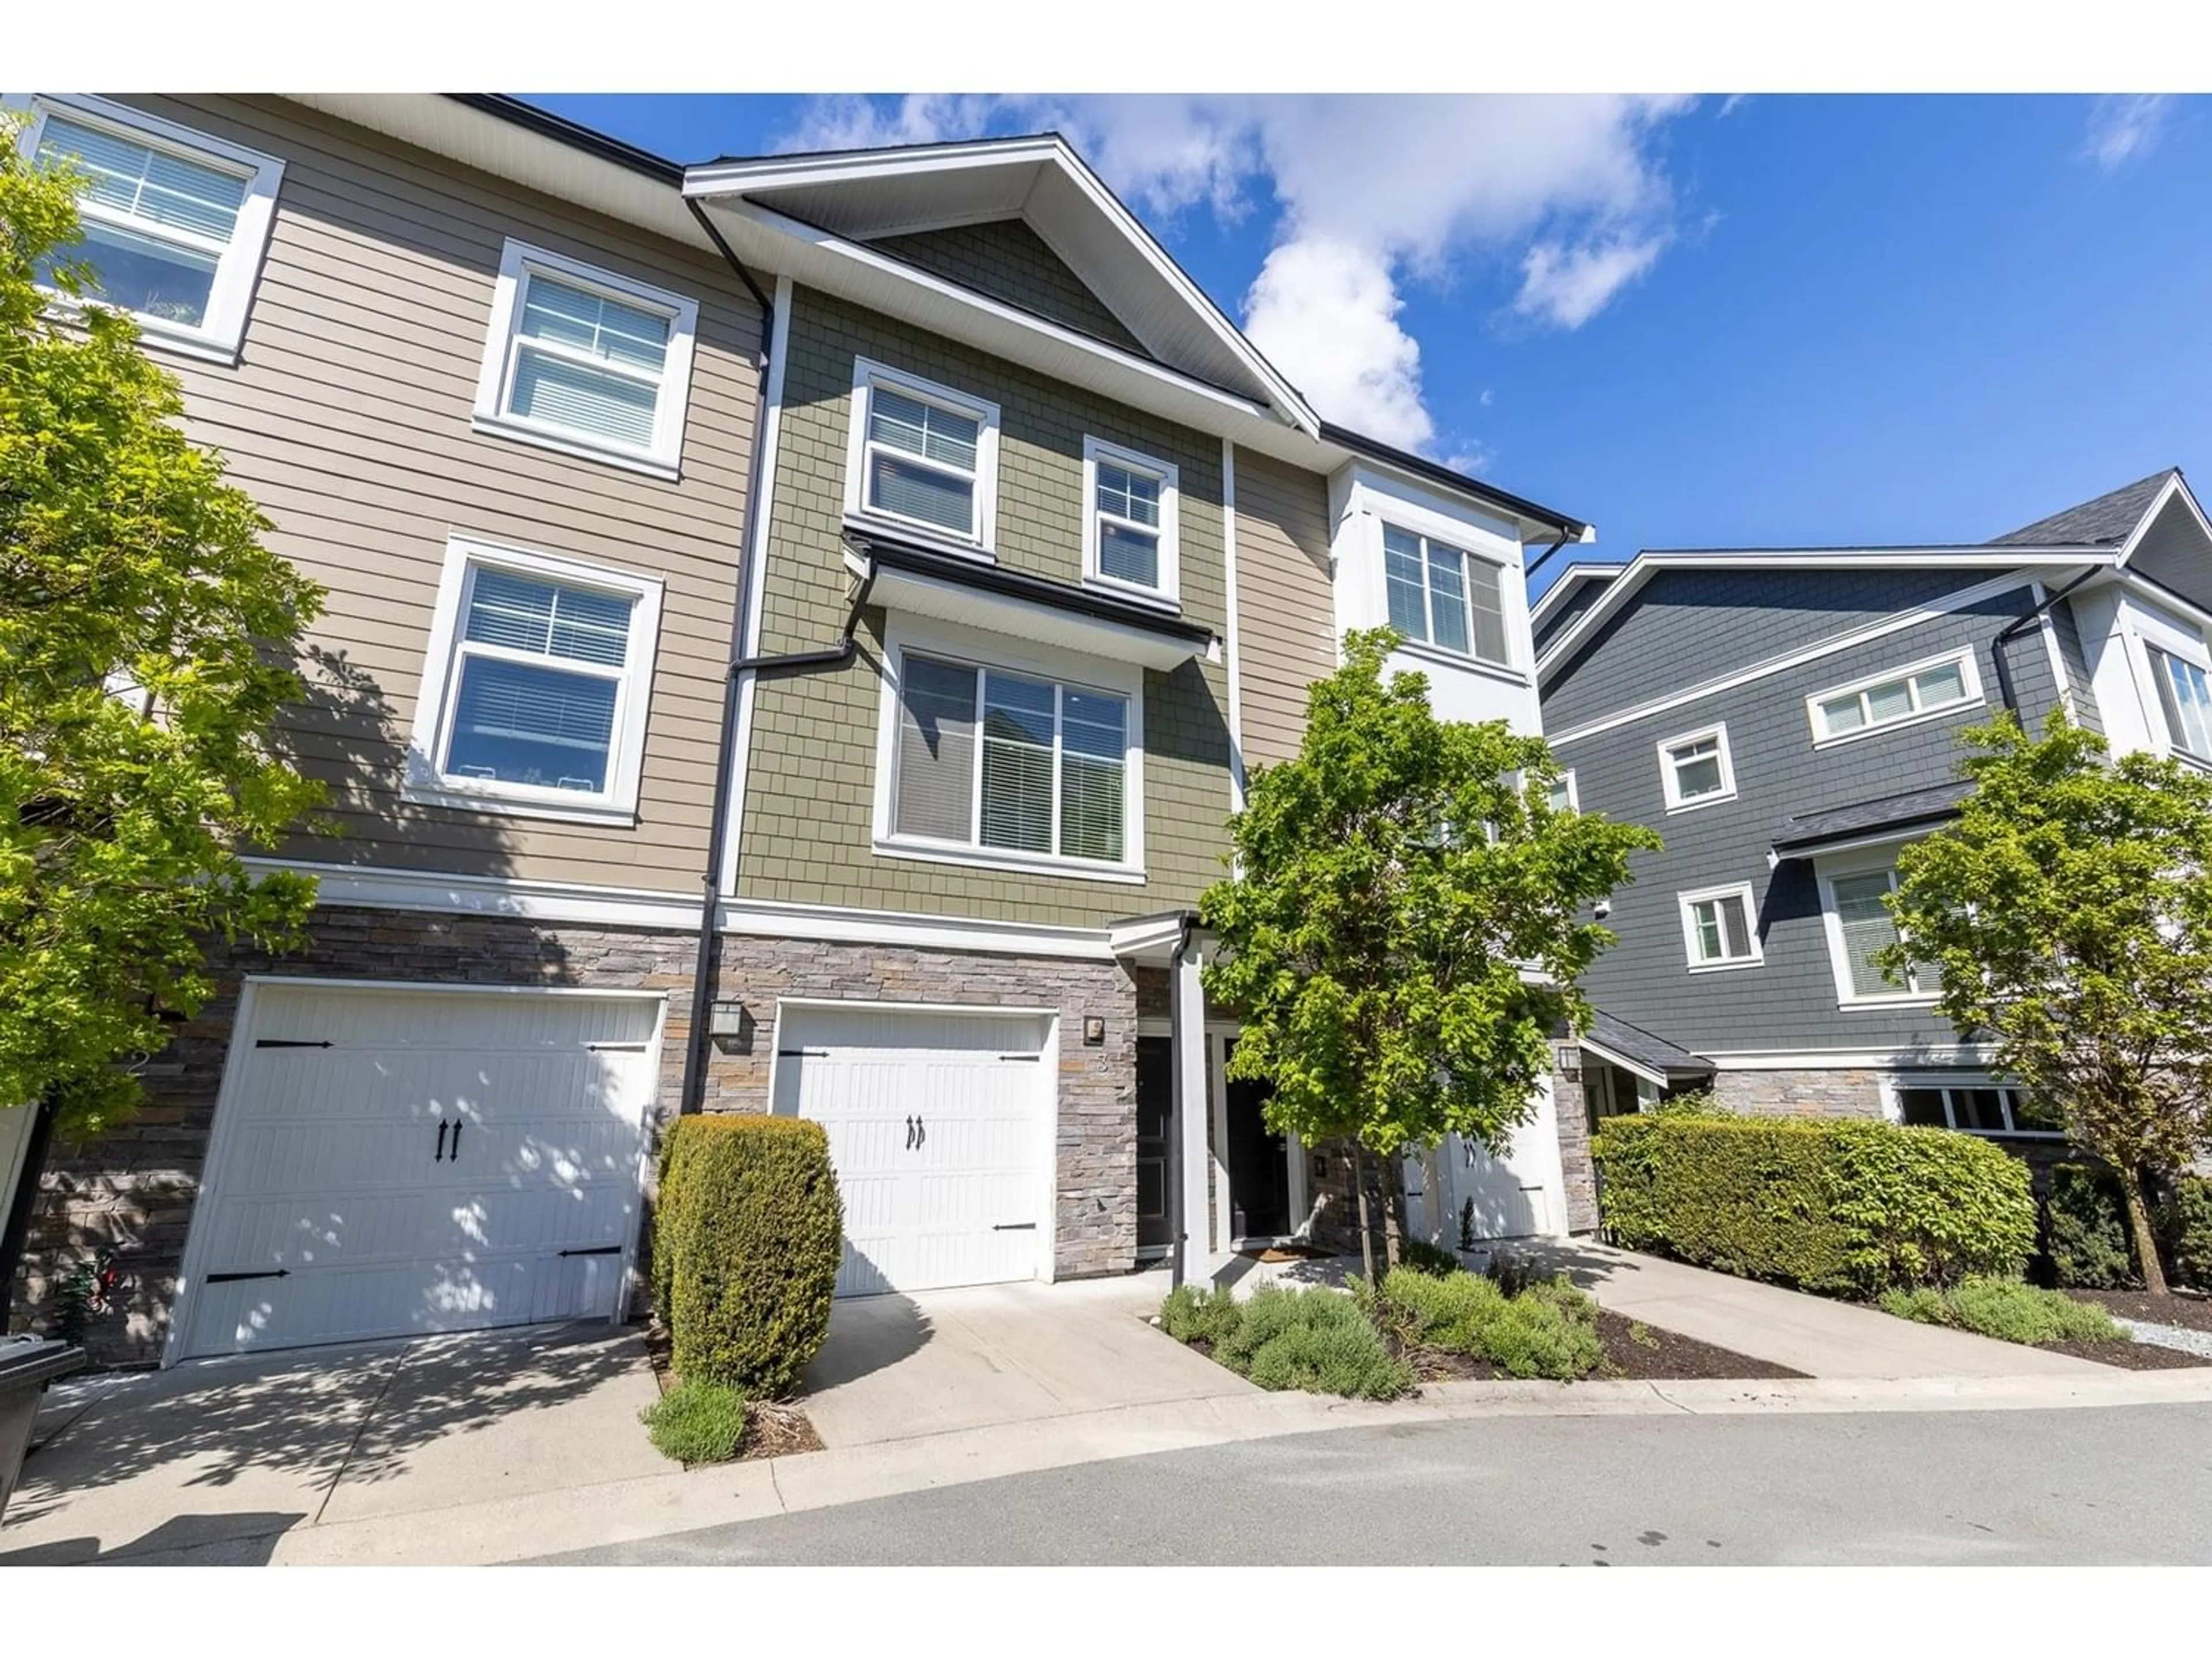 A pic from exterior of the house or condo for 3 21150 76A AVENUE, Langley British Columbia V2Y0V9